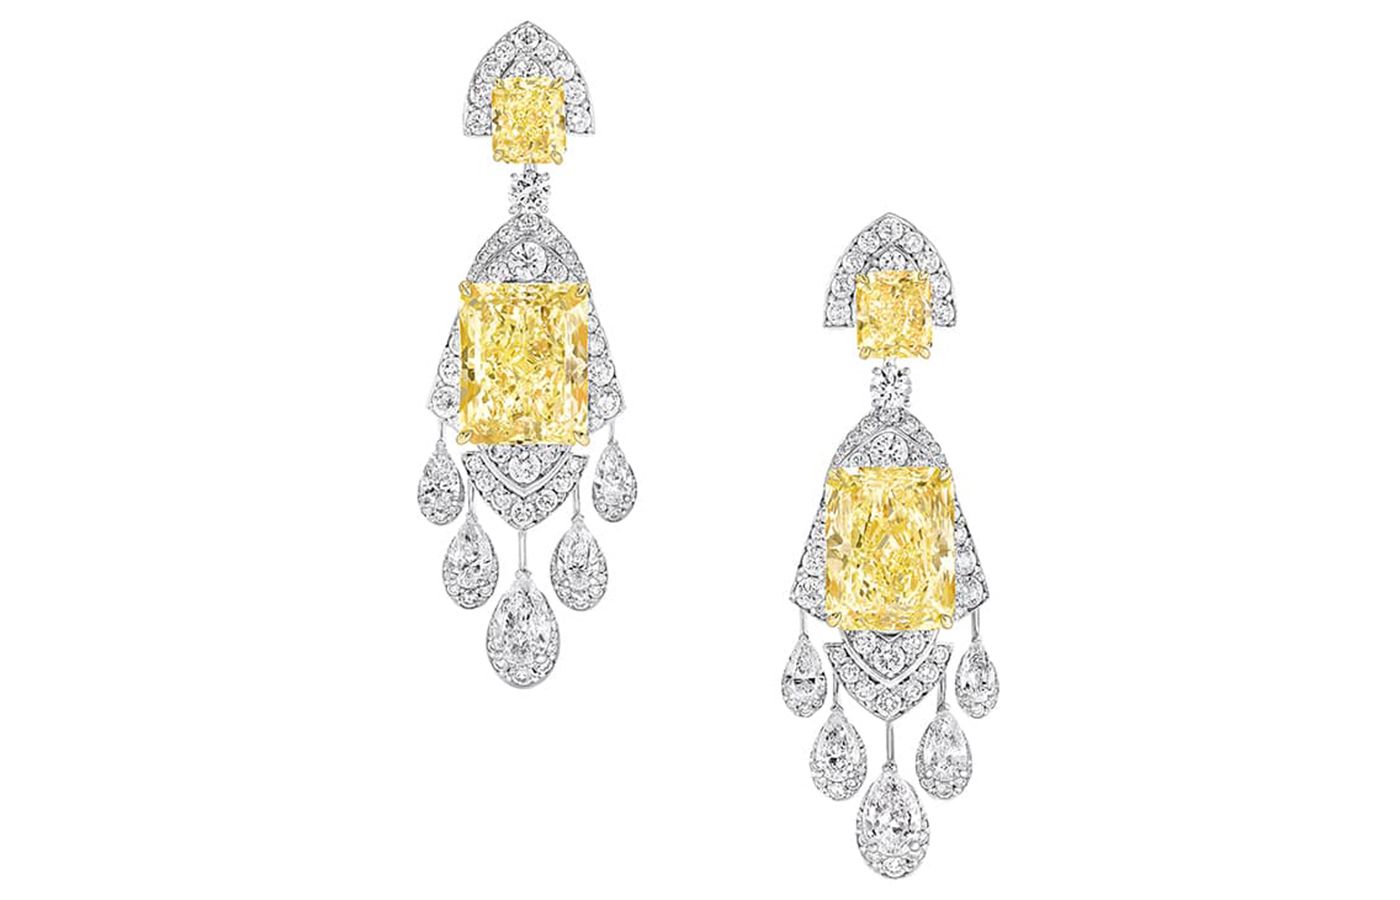 Graff The Girl Who Created The Stars earrings in white gold and diamonds featuring two 21-ct yellow diamonds from the Tribal High Jewellery collection